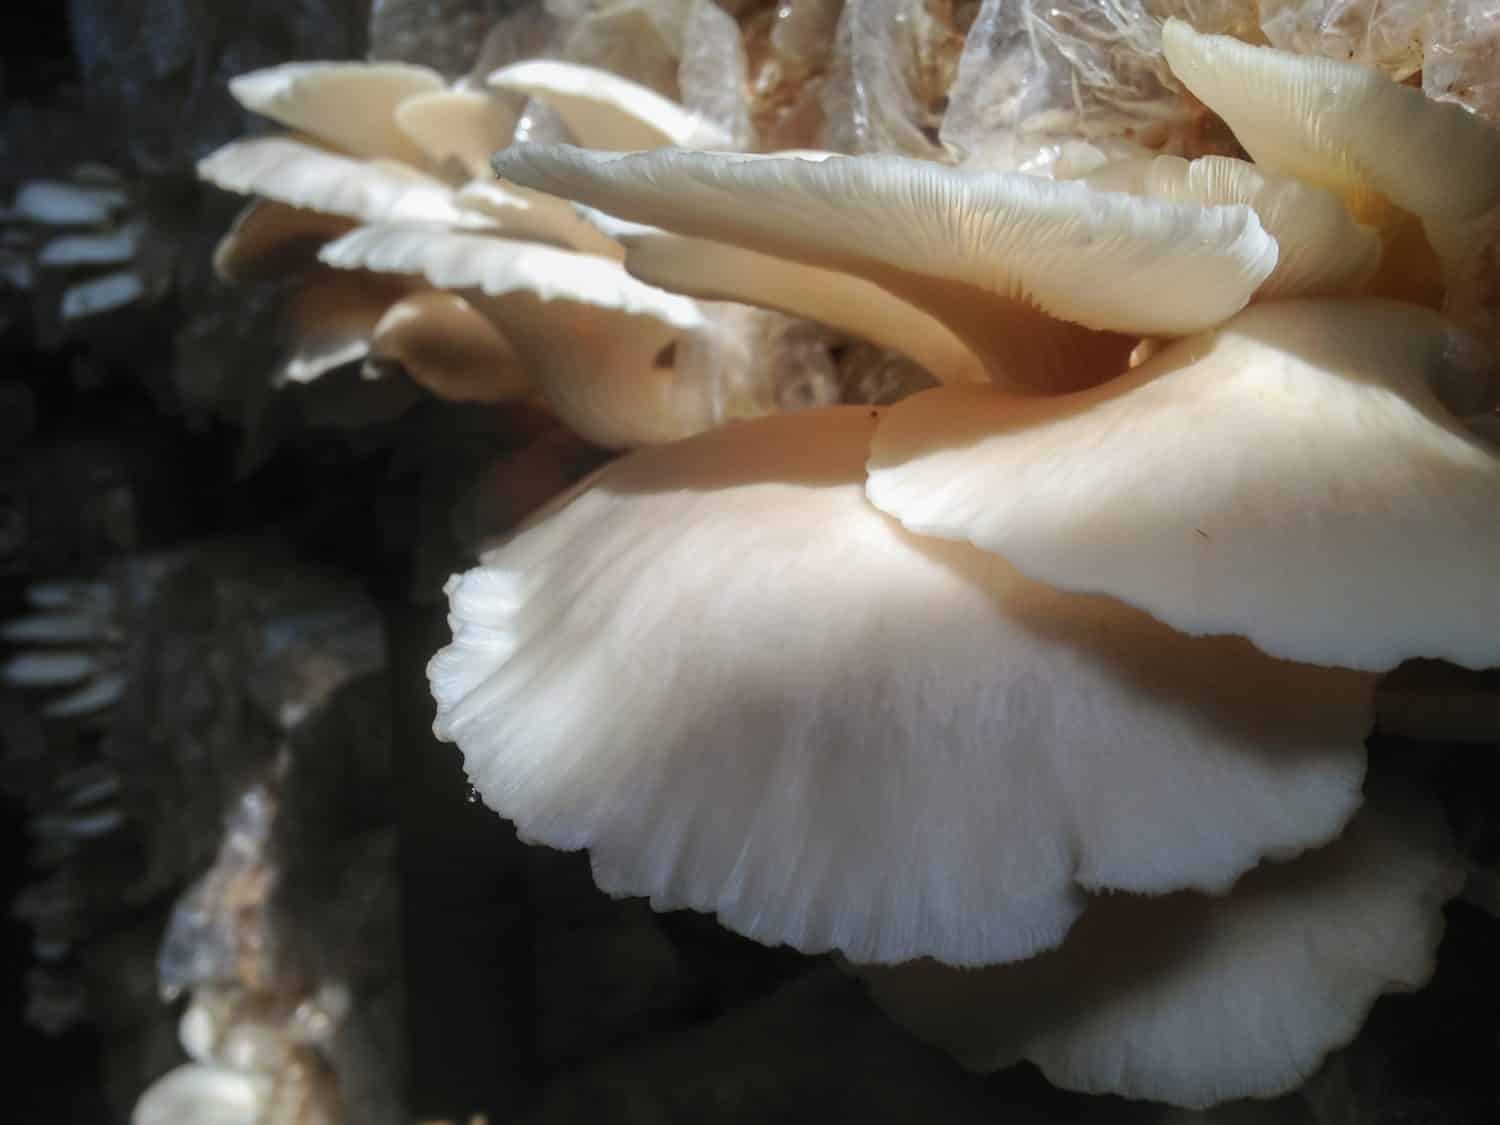 the blooming white oyster mushroom ready to plucked for harvest in house of mushrooms